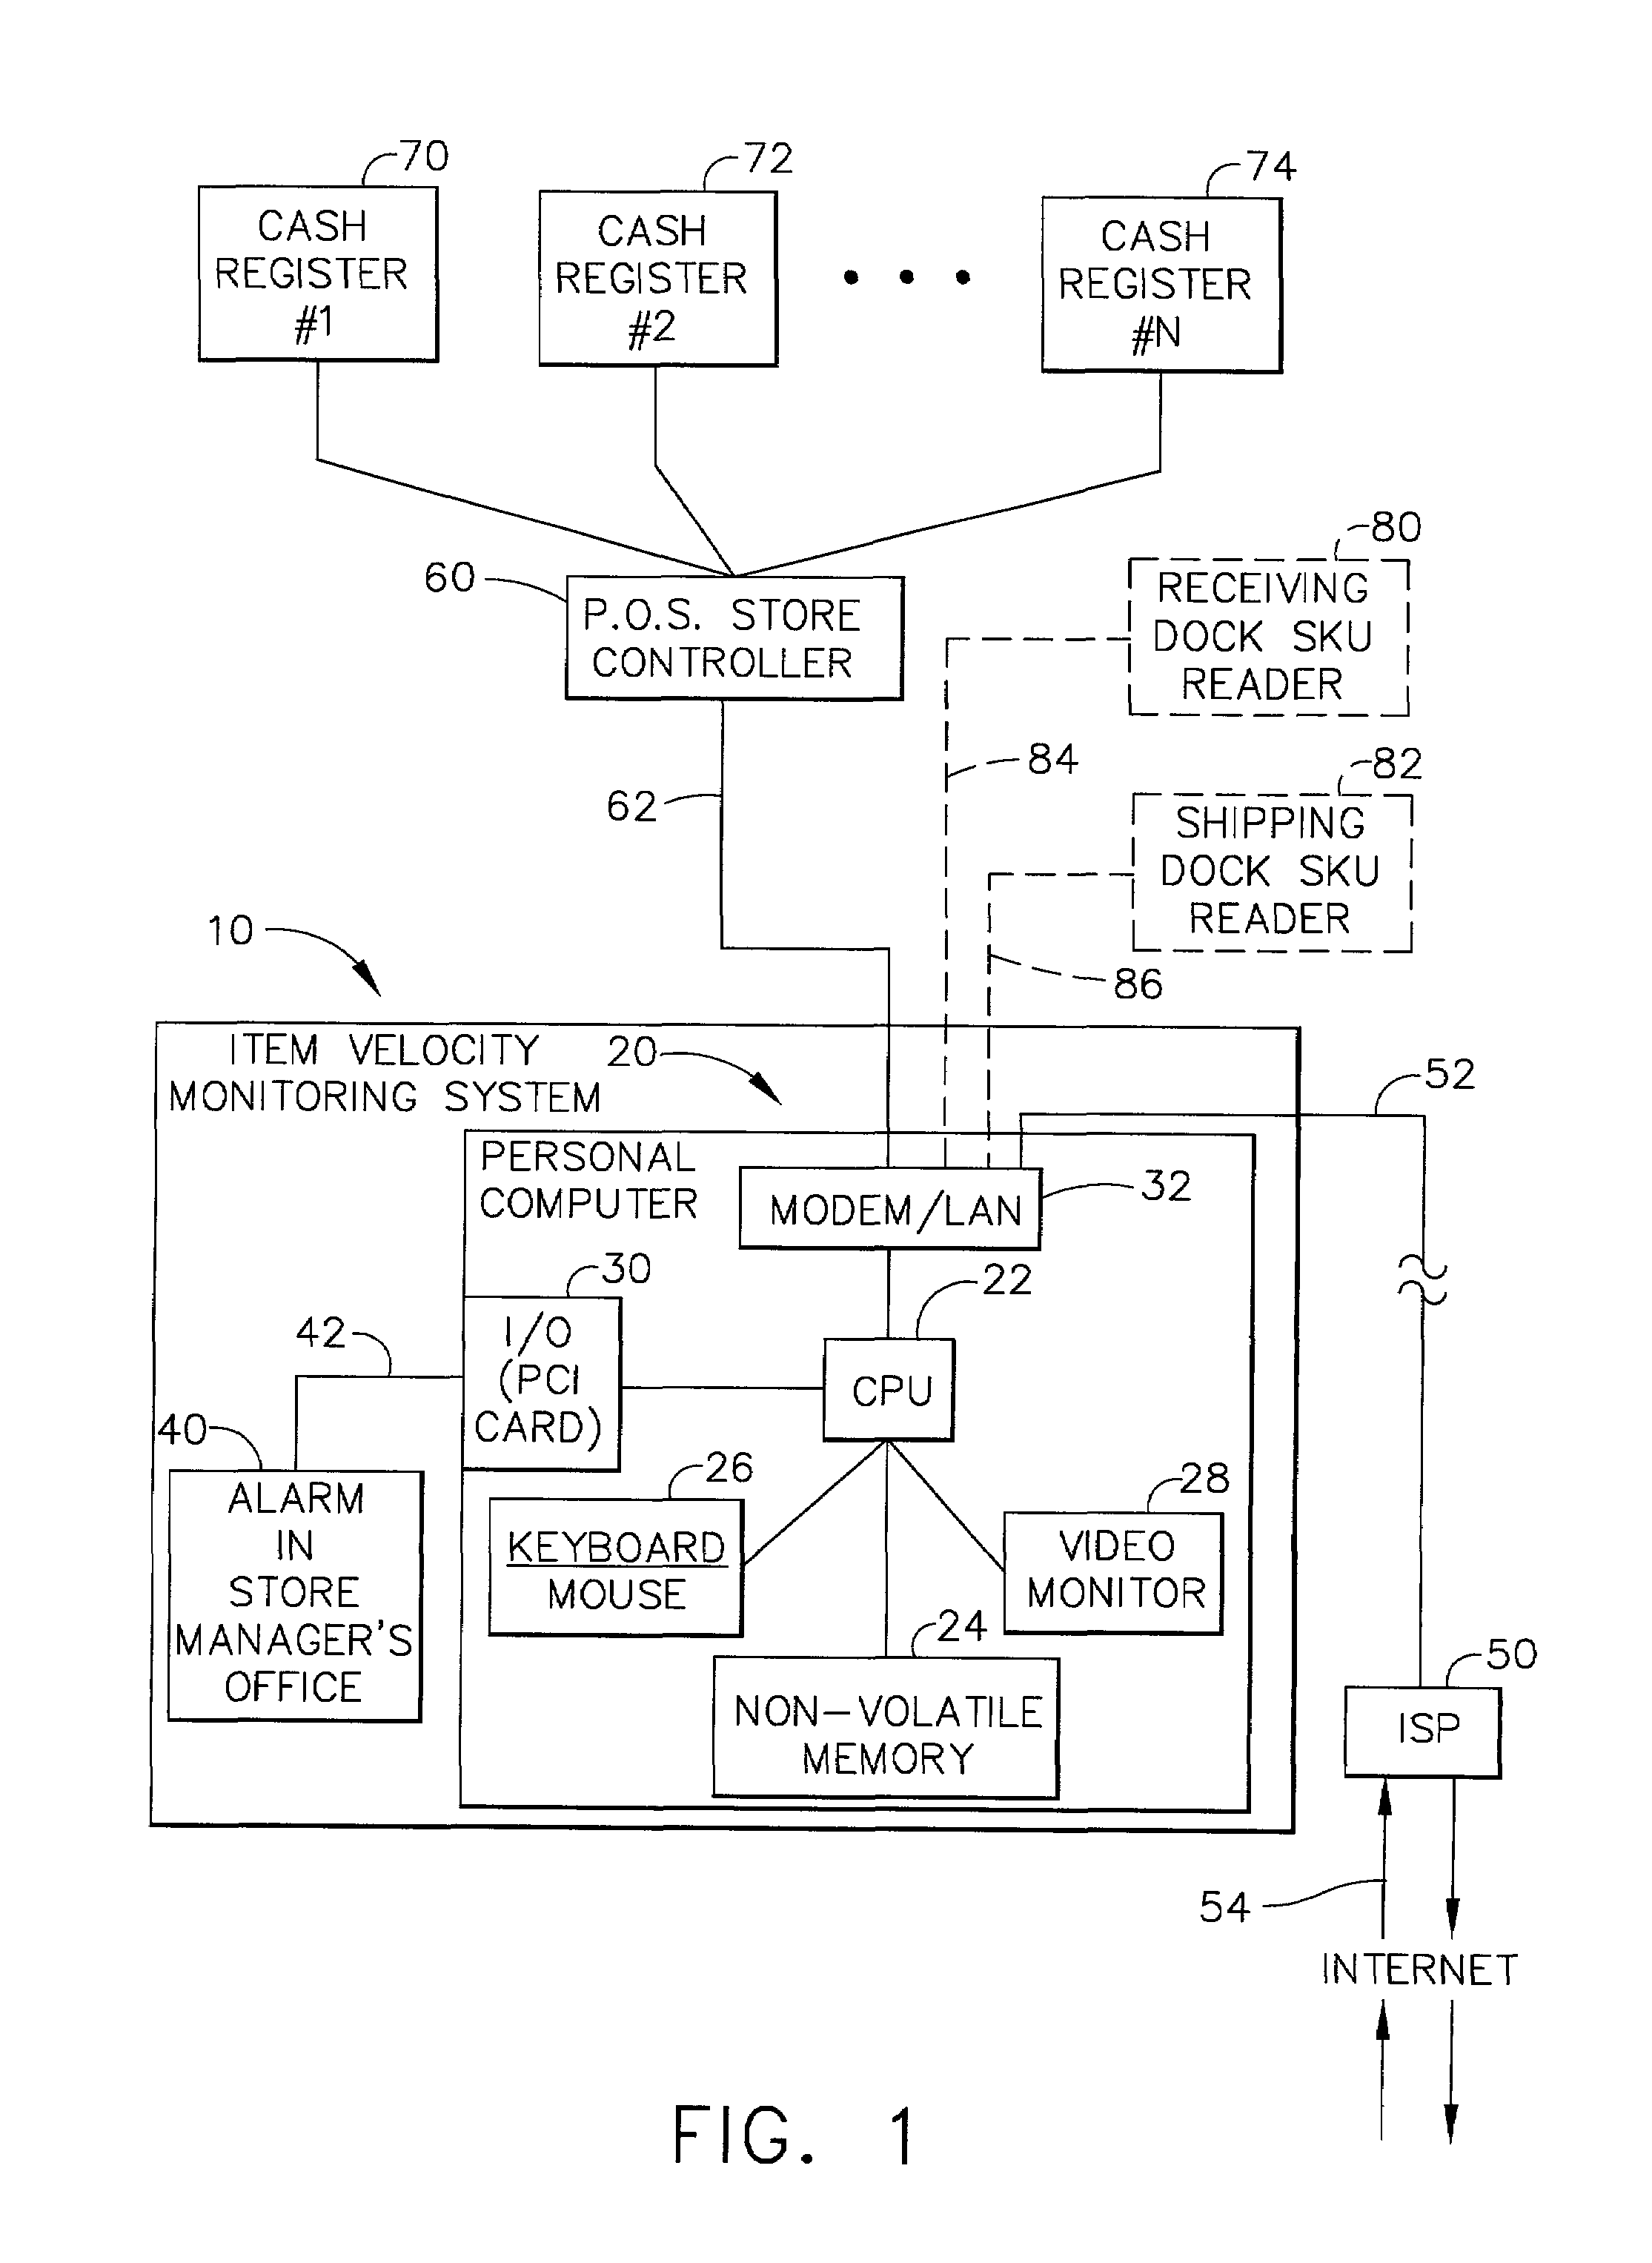 Method and apparatus for monitoring the flow of items through a store or warehouse